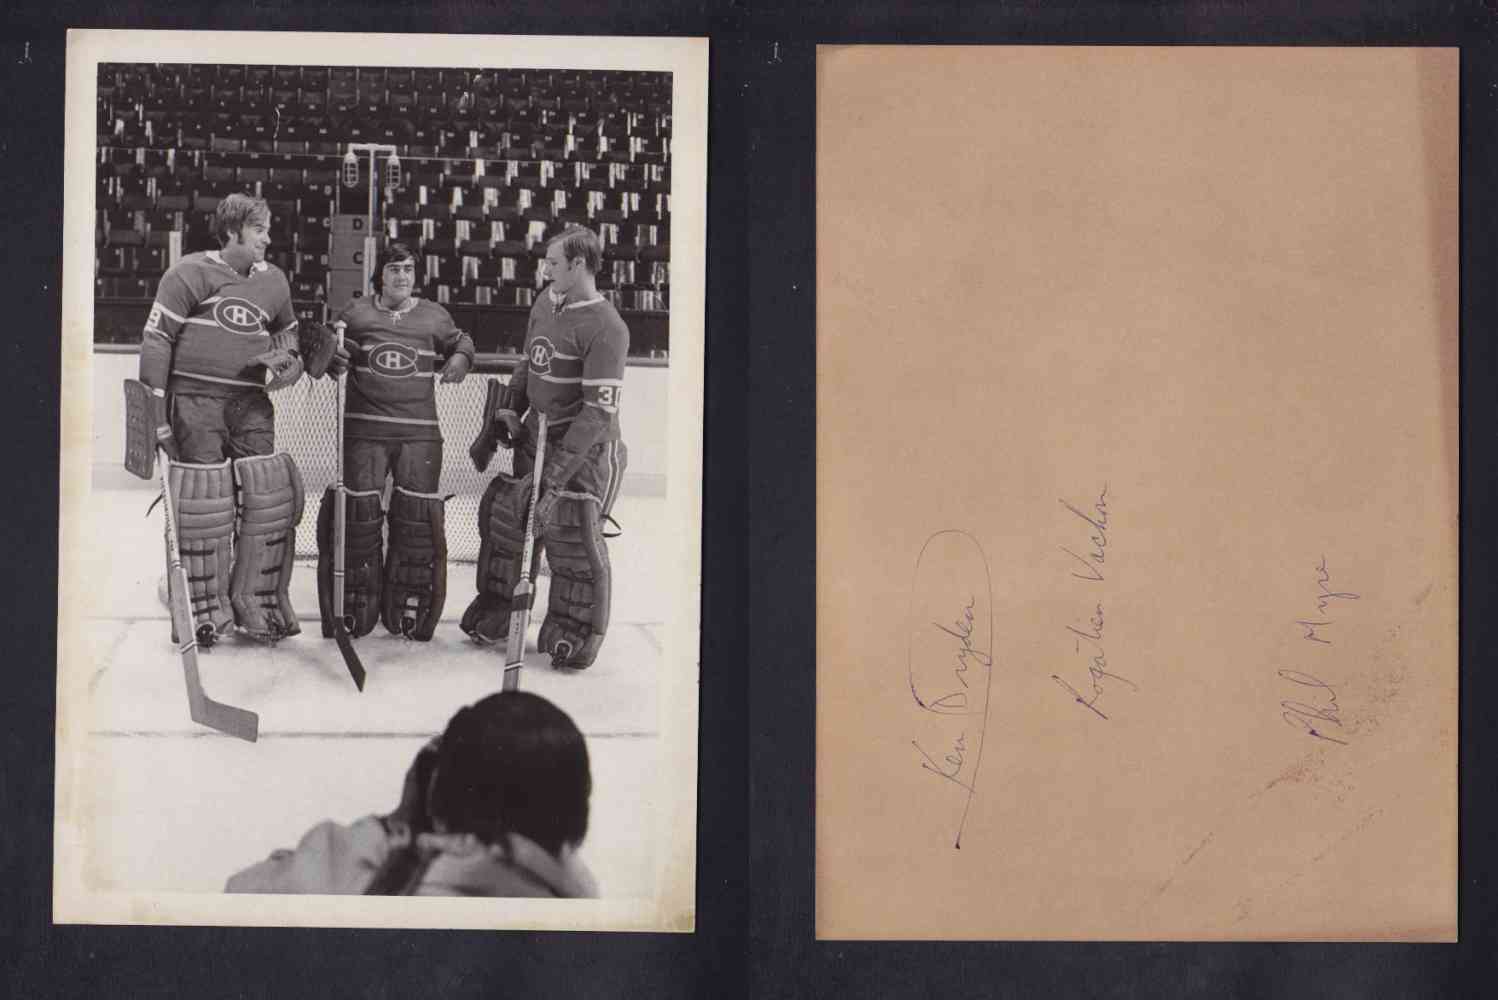 EARLY 1970'S MONTREAL CANADIENS GOALIES PHOTO DRYDEN, VACHON, MYRE photo